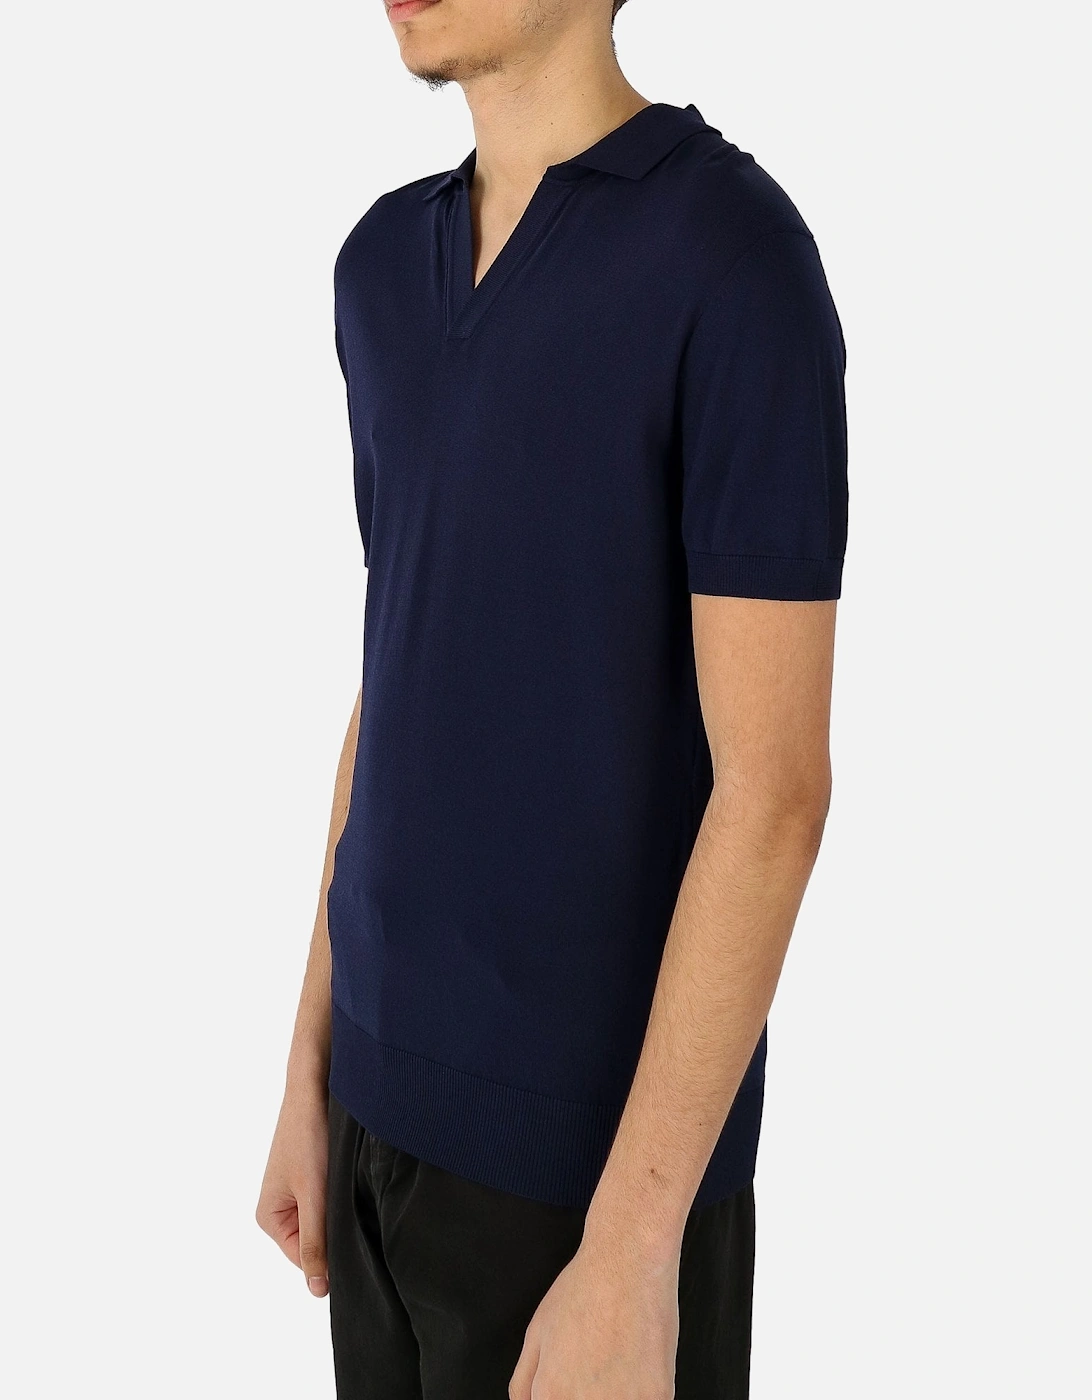 Open Collar Knitted Navy Polo